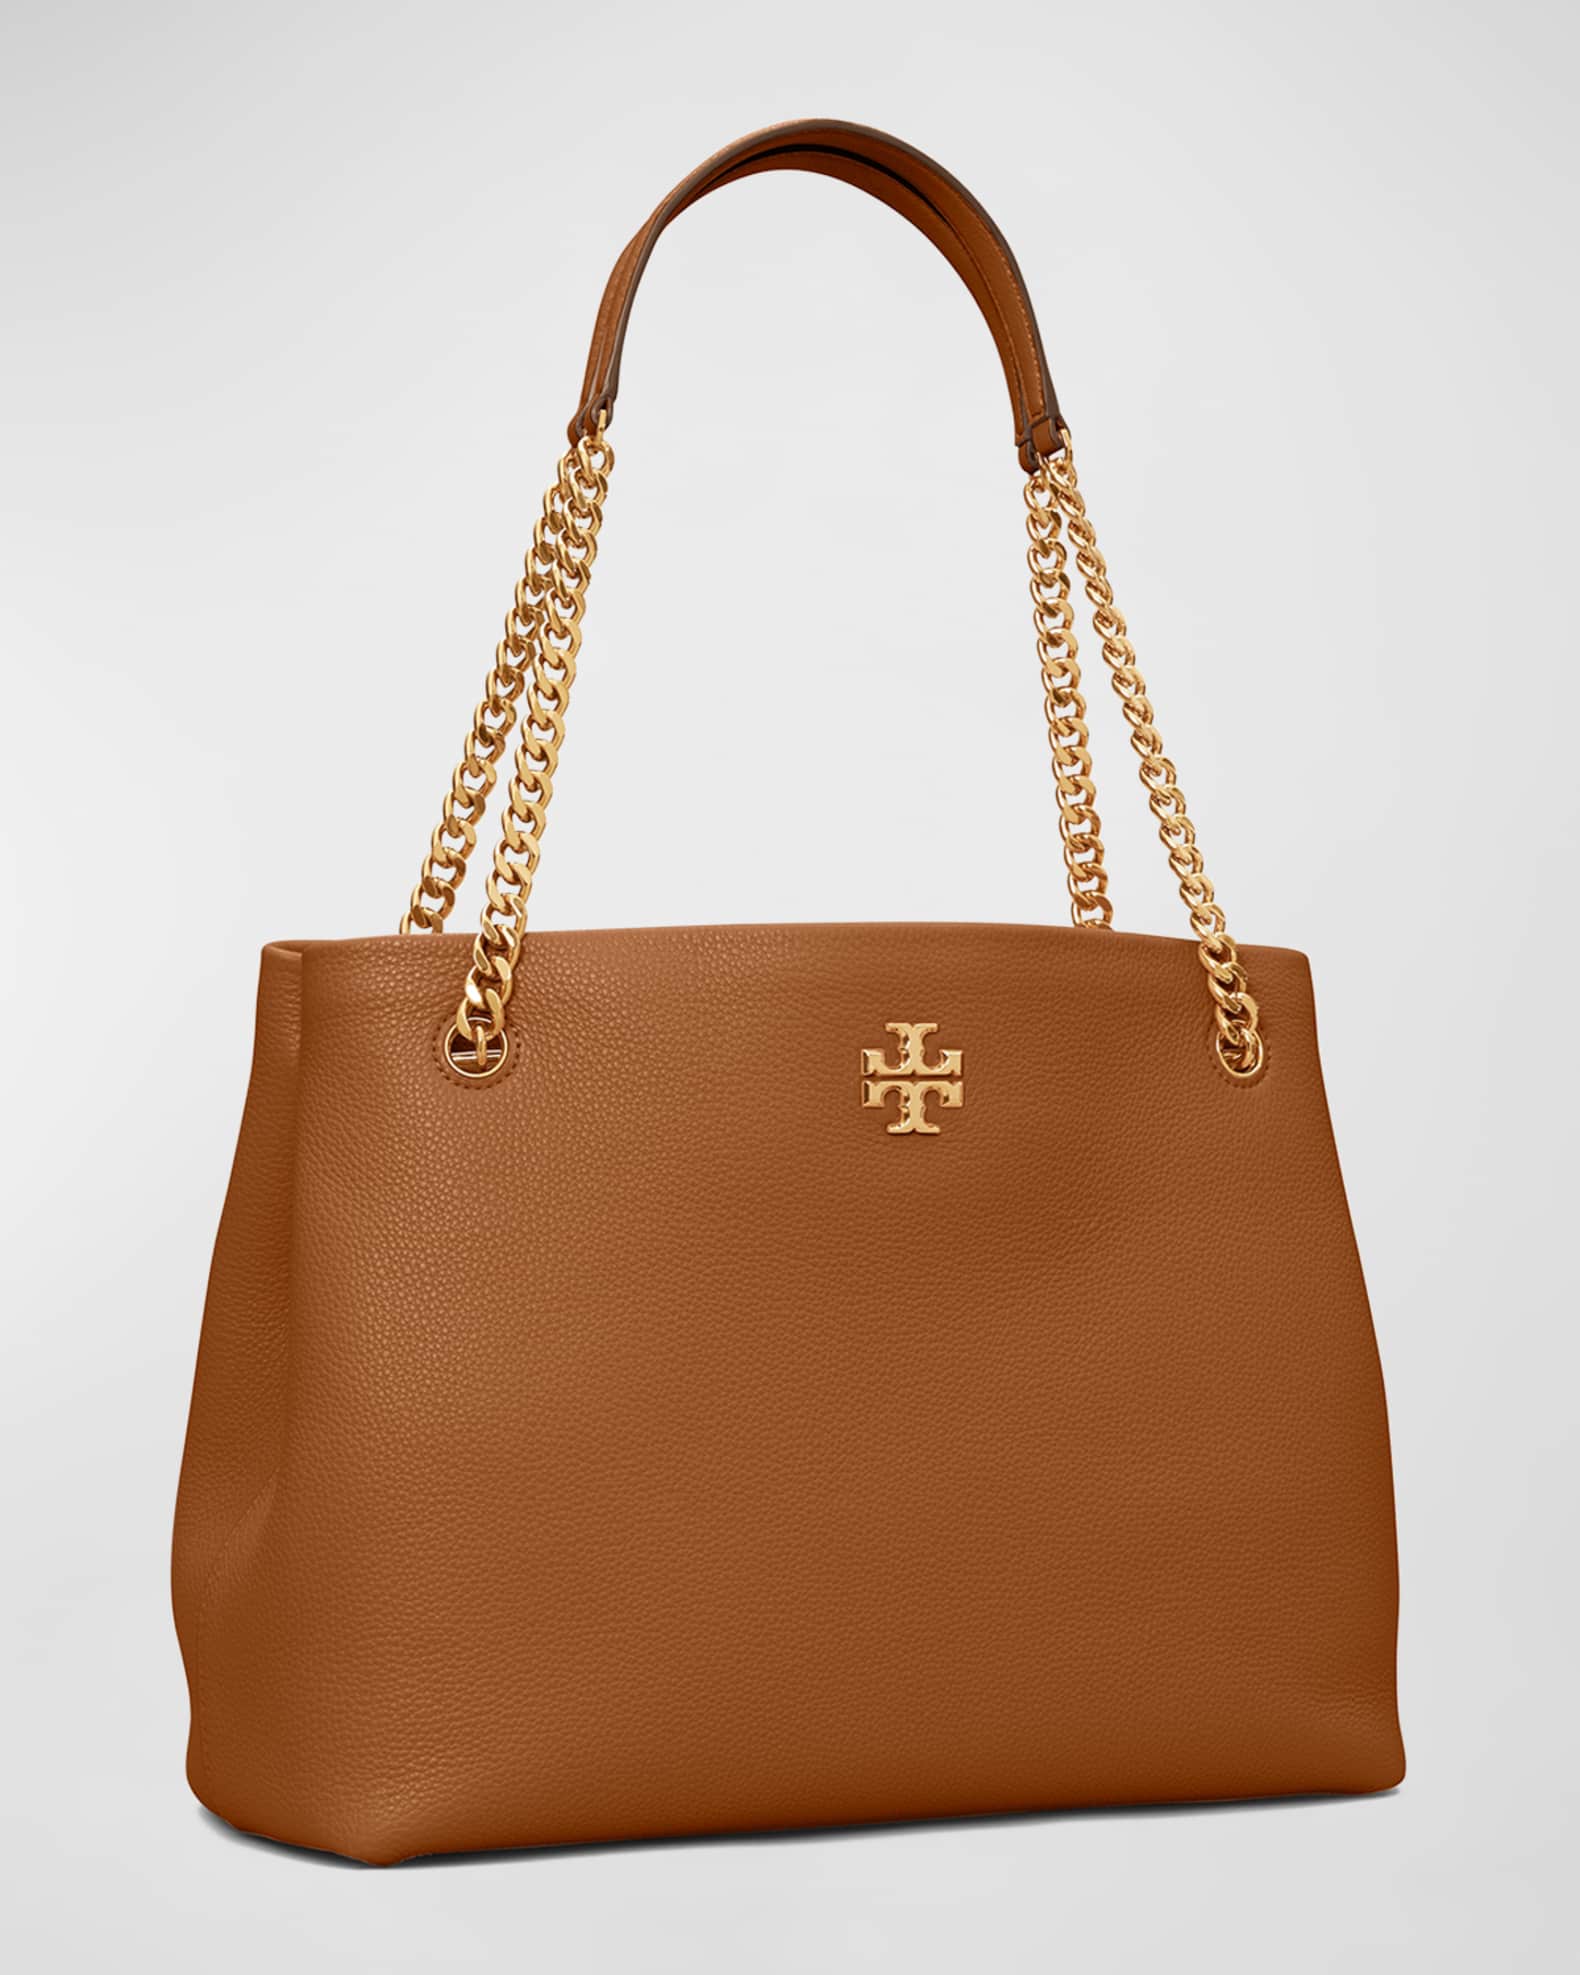 TORY BURCH Nude Kira Small Leather Tote Bag - The Purse Ladies